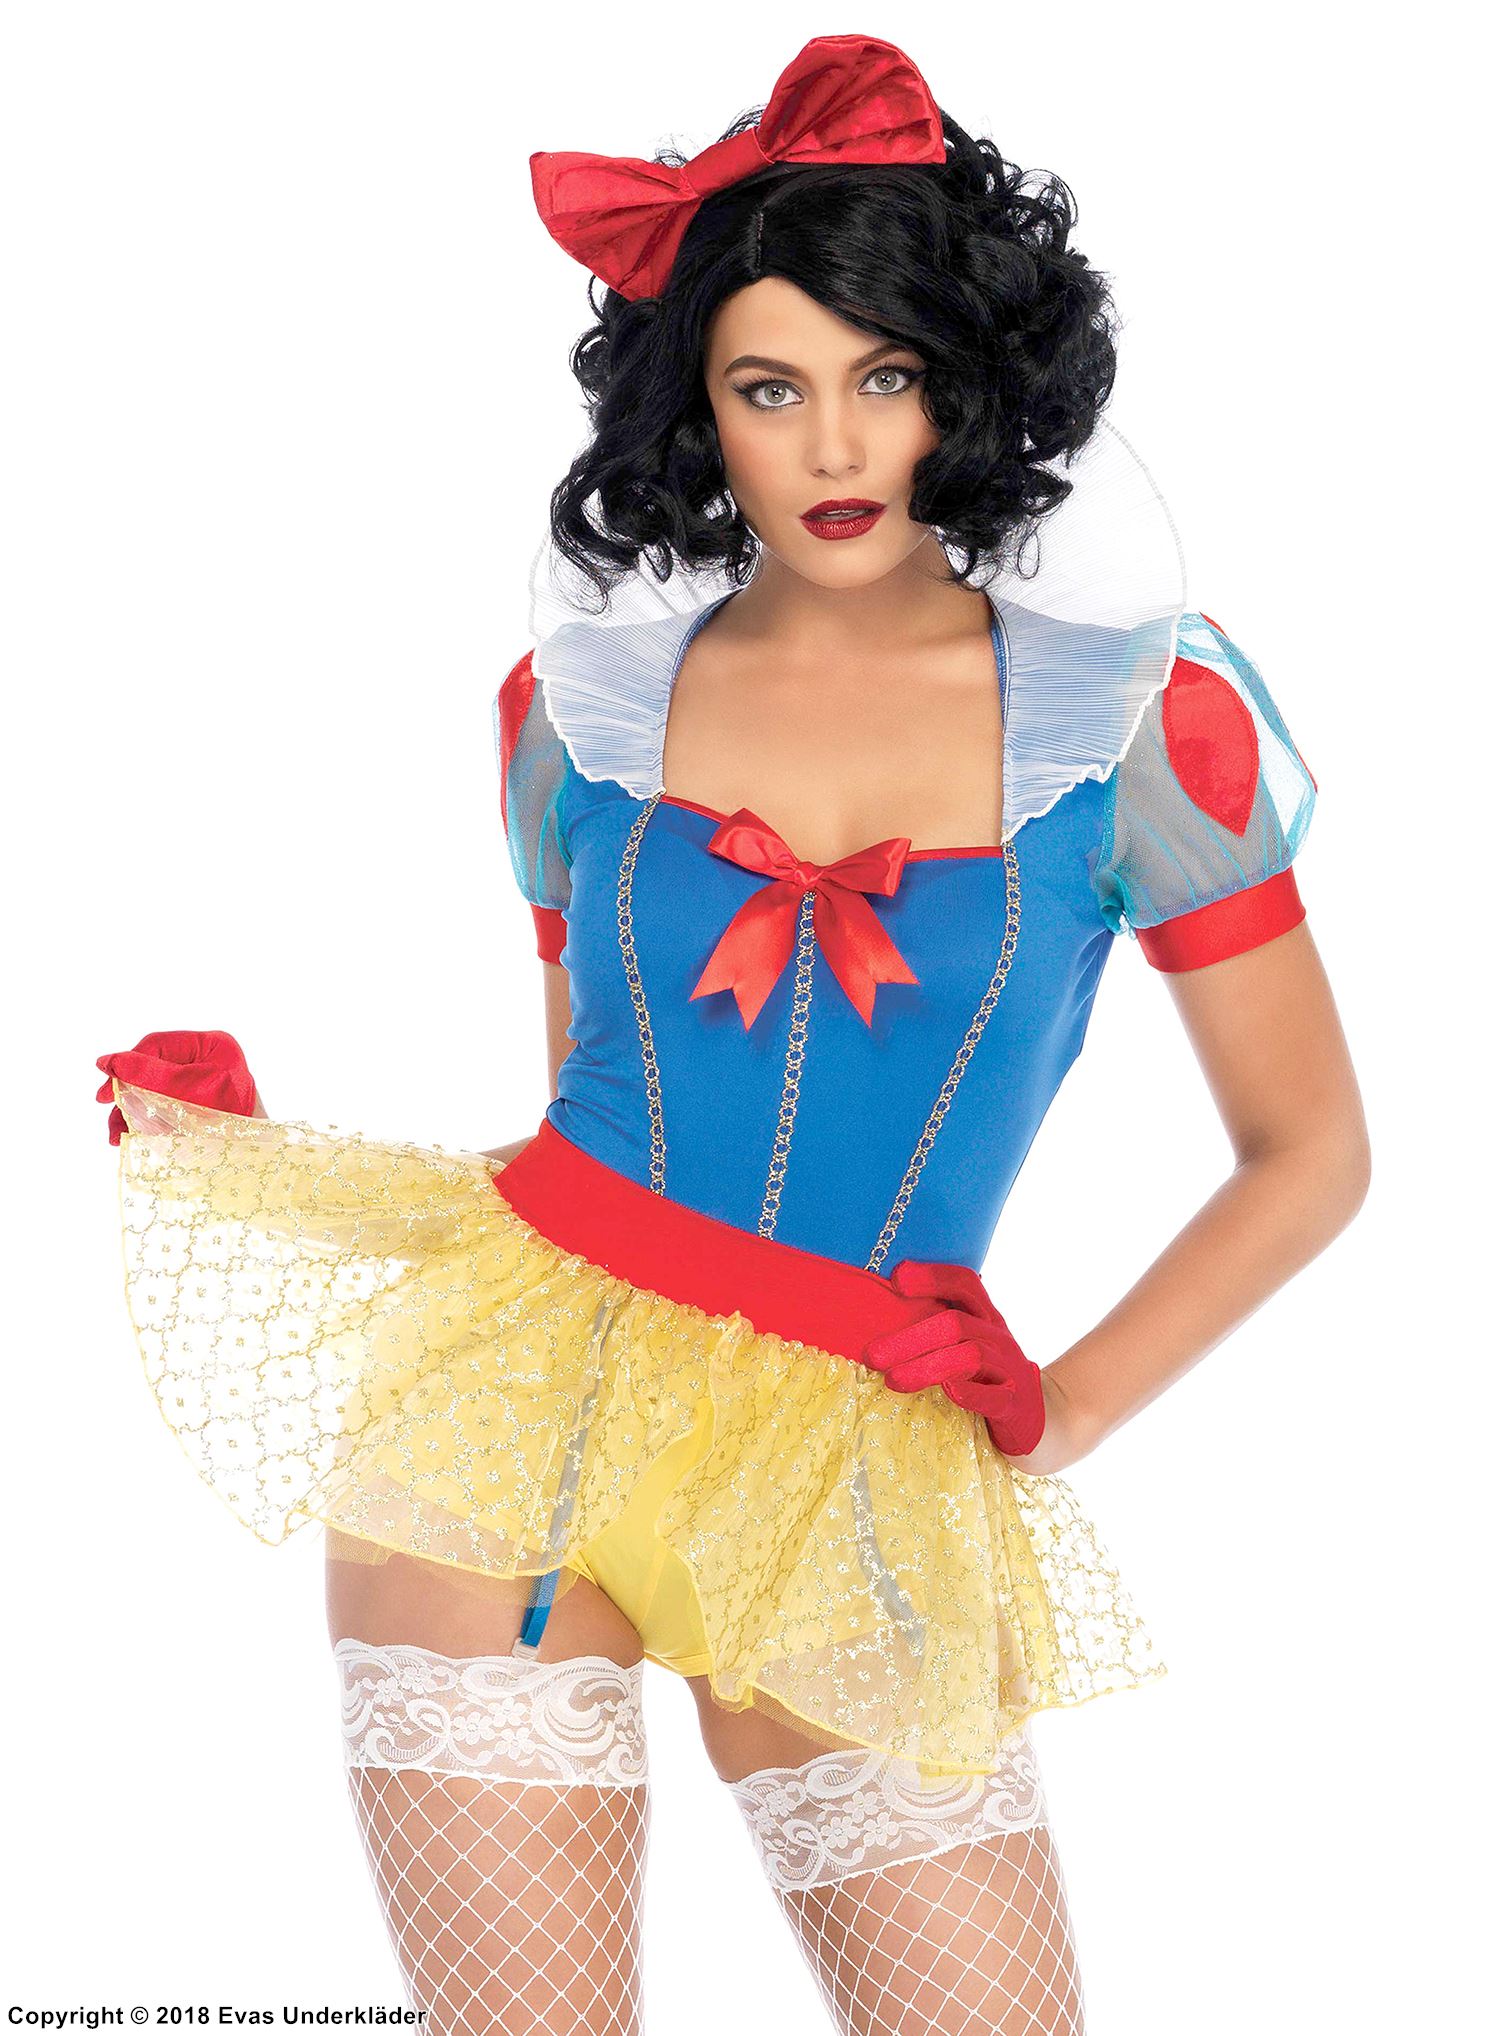 Snow White, costume dress, big bow, stay up collar